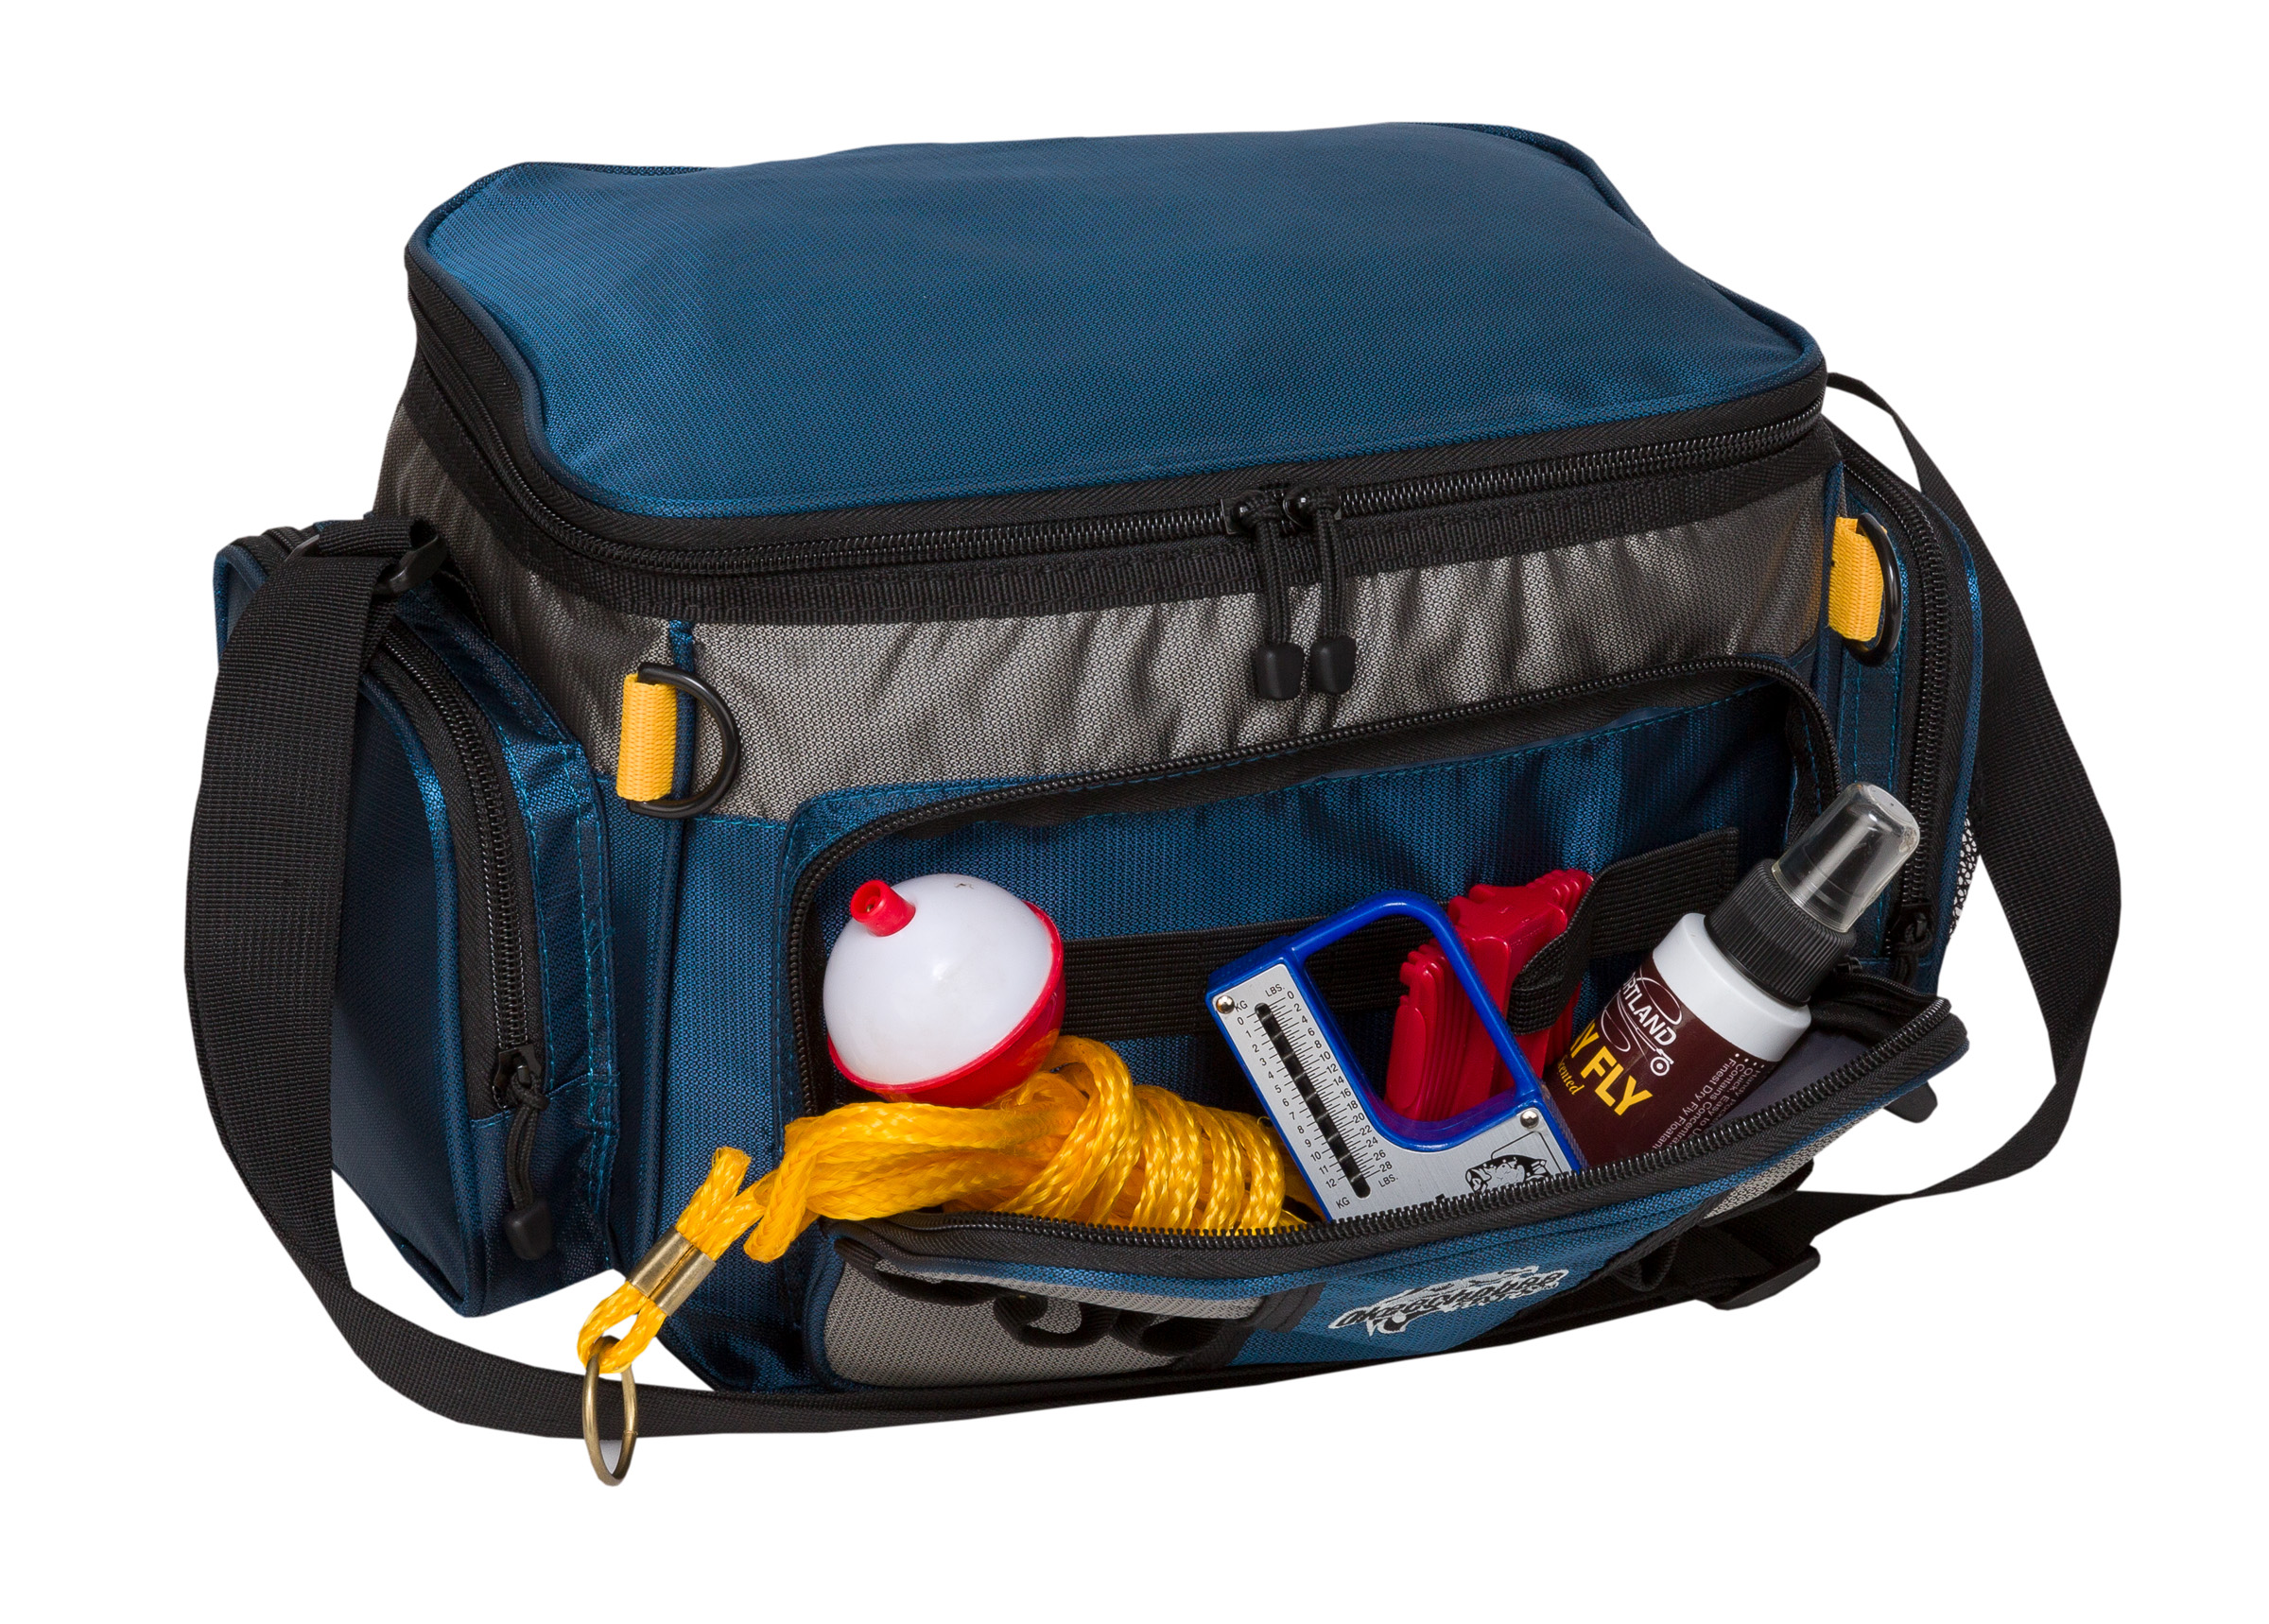 Okeechobee Fats Small Soft-Sided Fishing Tackle Bag with 2 Medium Utility Lure Boxes, Blue Polyester - image 5 of 12